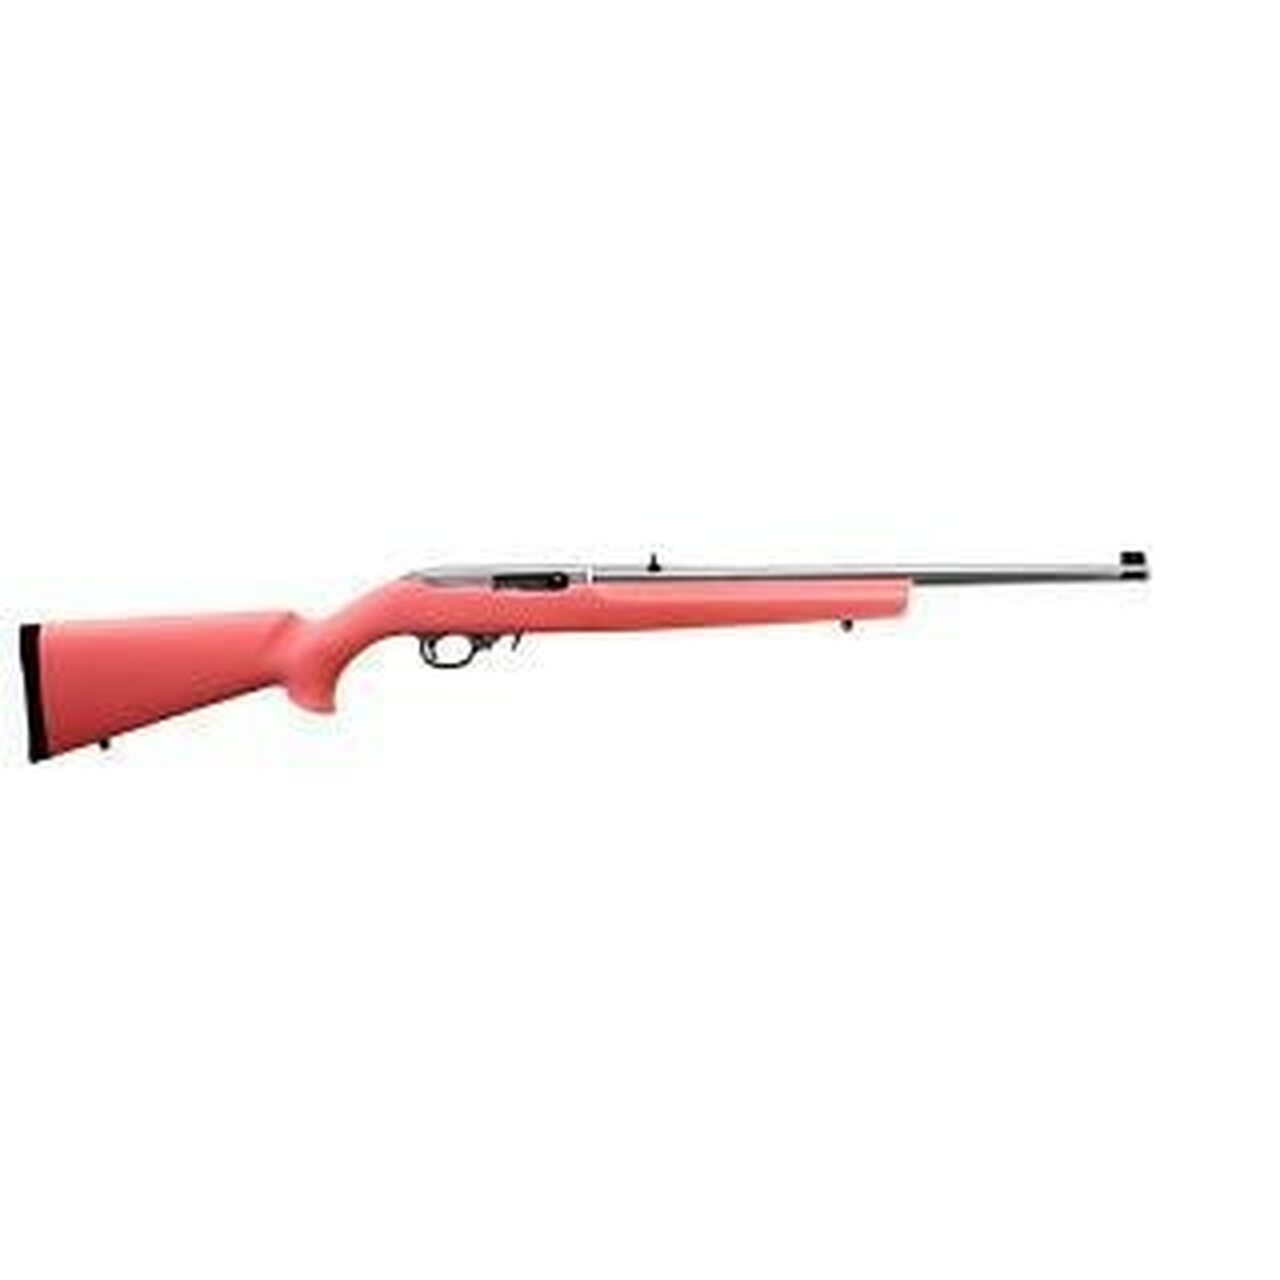 Image of Ruger 10/22 Pink Synthetic Stock Stainless Steel Barrel, 10 Round Mag